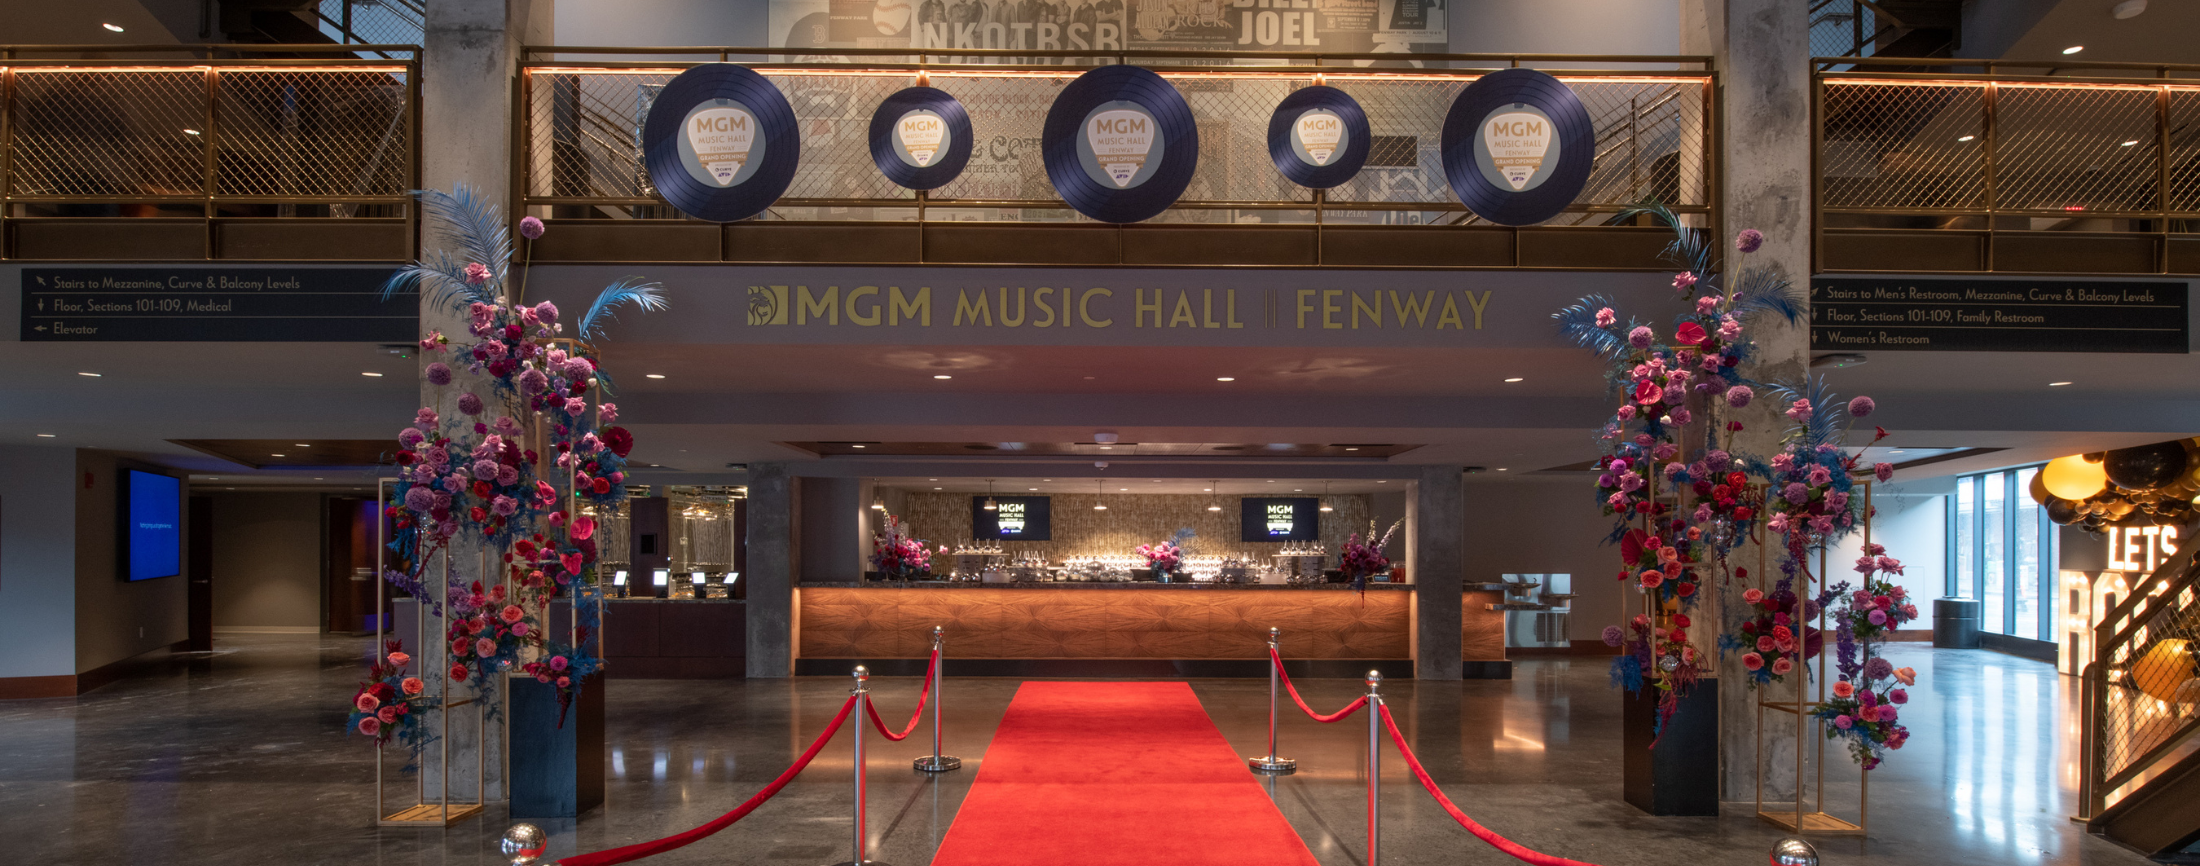 The MGM Music Hall at Fenway opened on August 29th next to iconic Fenway Park.